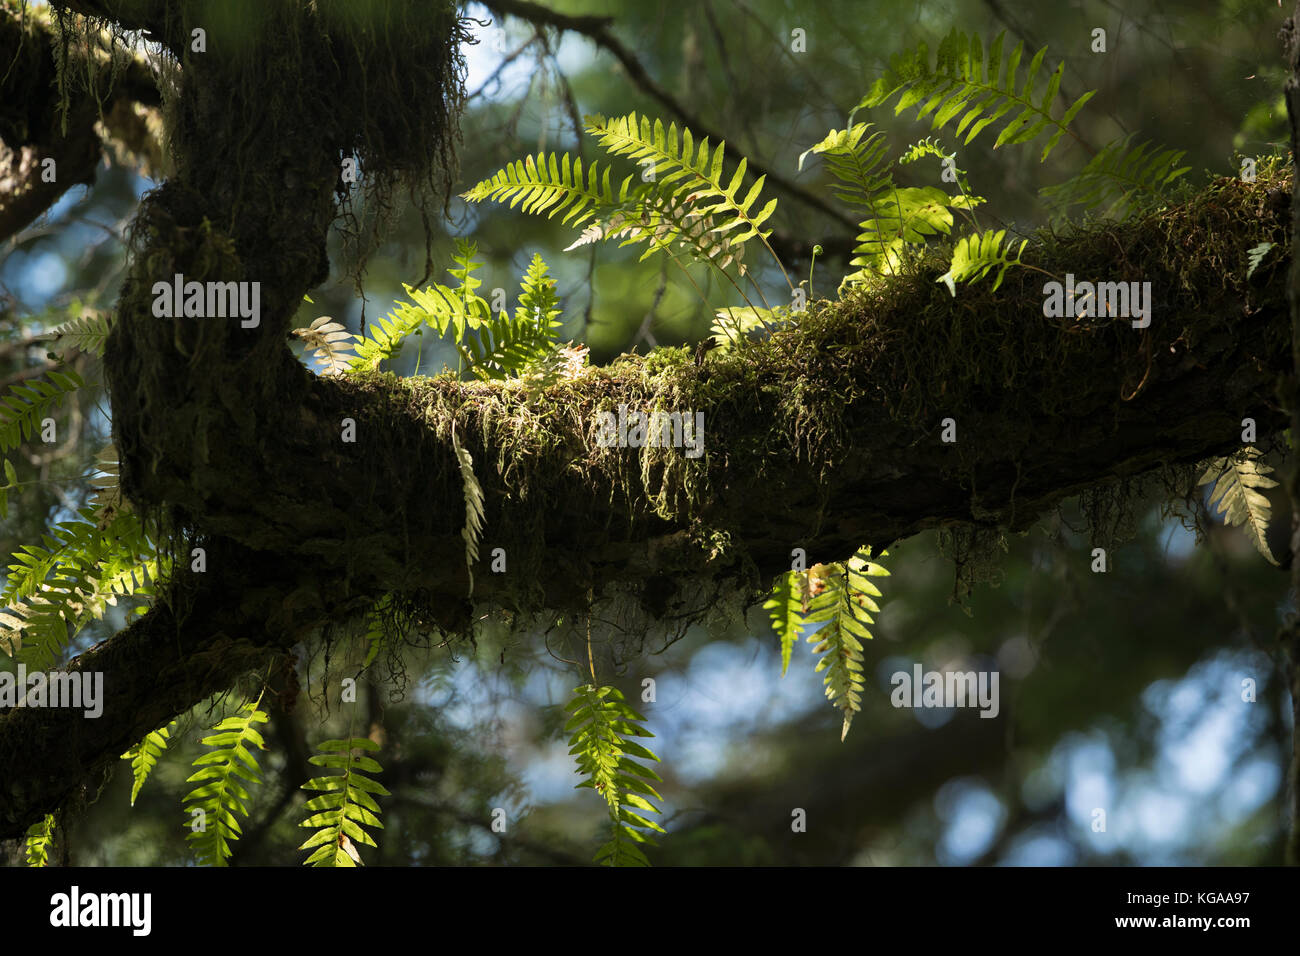 Old growth forest, ferns growing on tree, Alaska Stock Photo